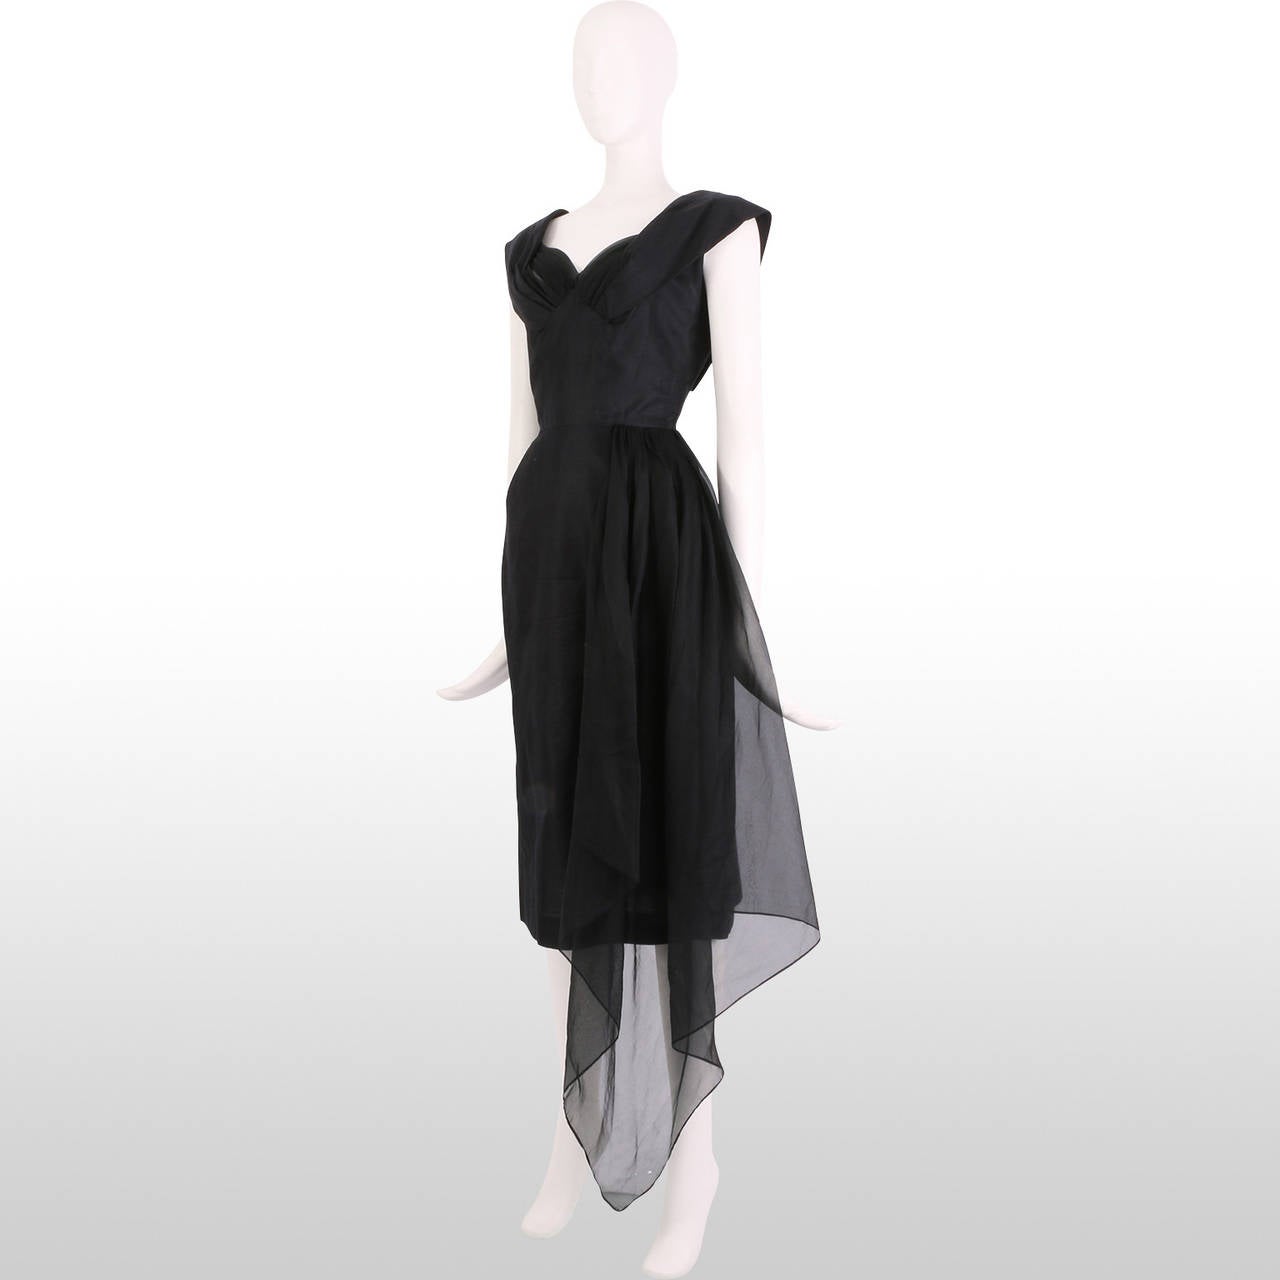 This unique dress from the 1950's is a great little LBD to wear for this party season. The sweetheart neckline is detailed with pleated chiffon to accentuate the bust and the wide shoulders straps create an elegant capped effect. The reverse lapels